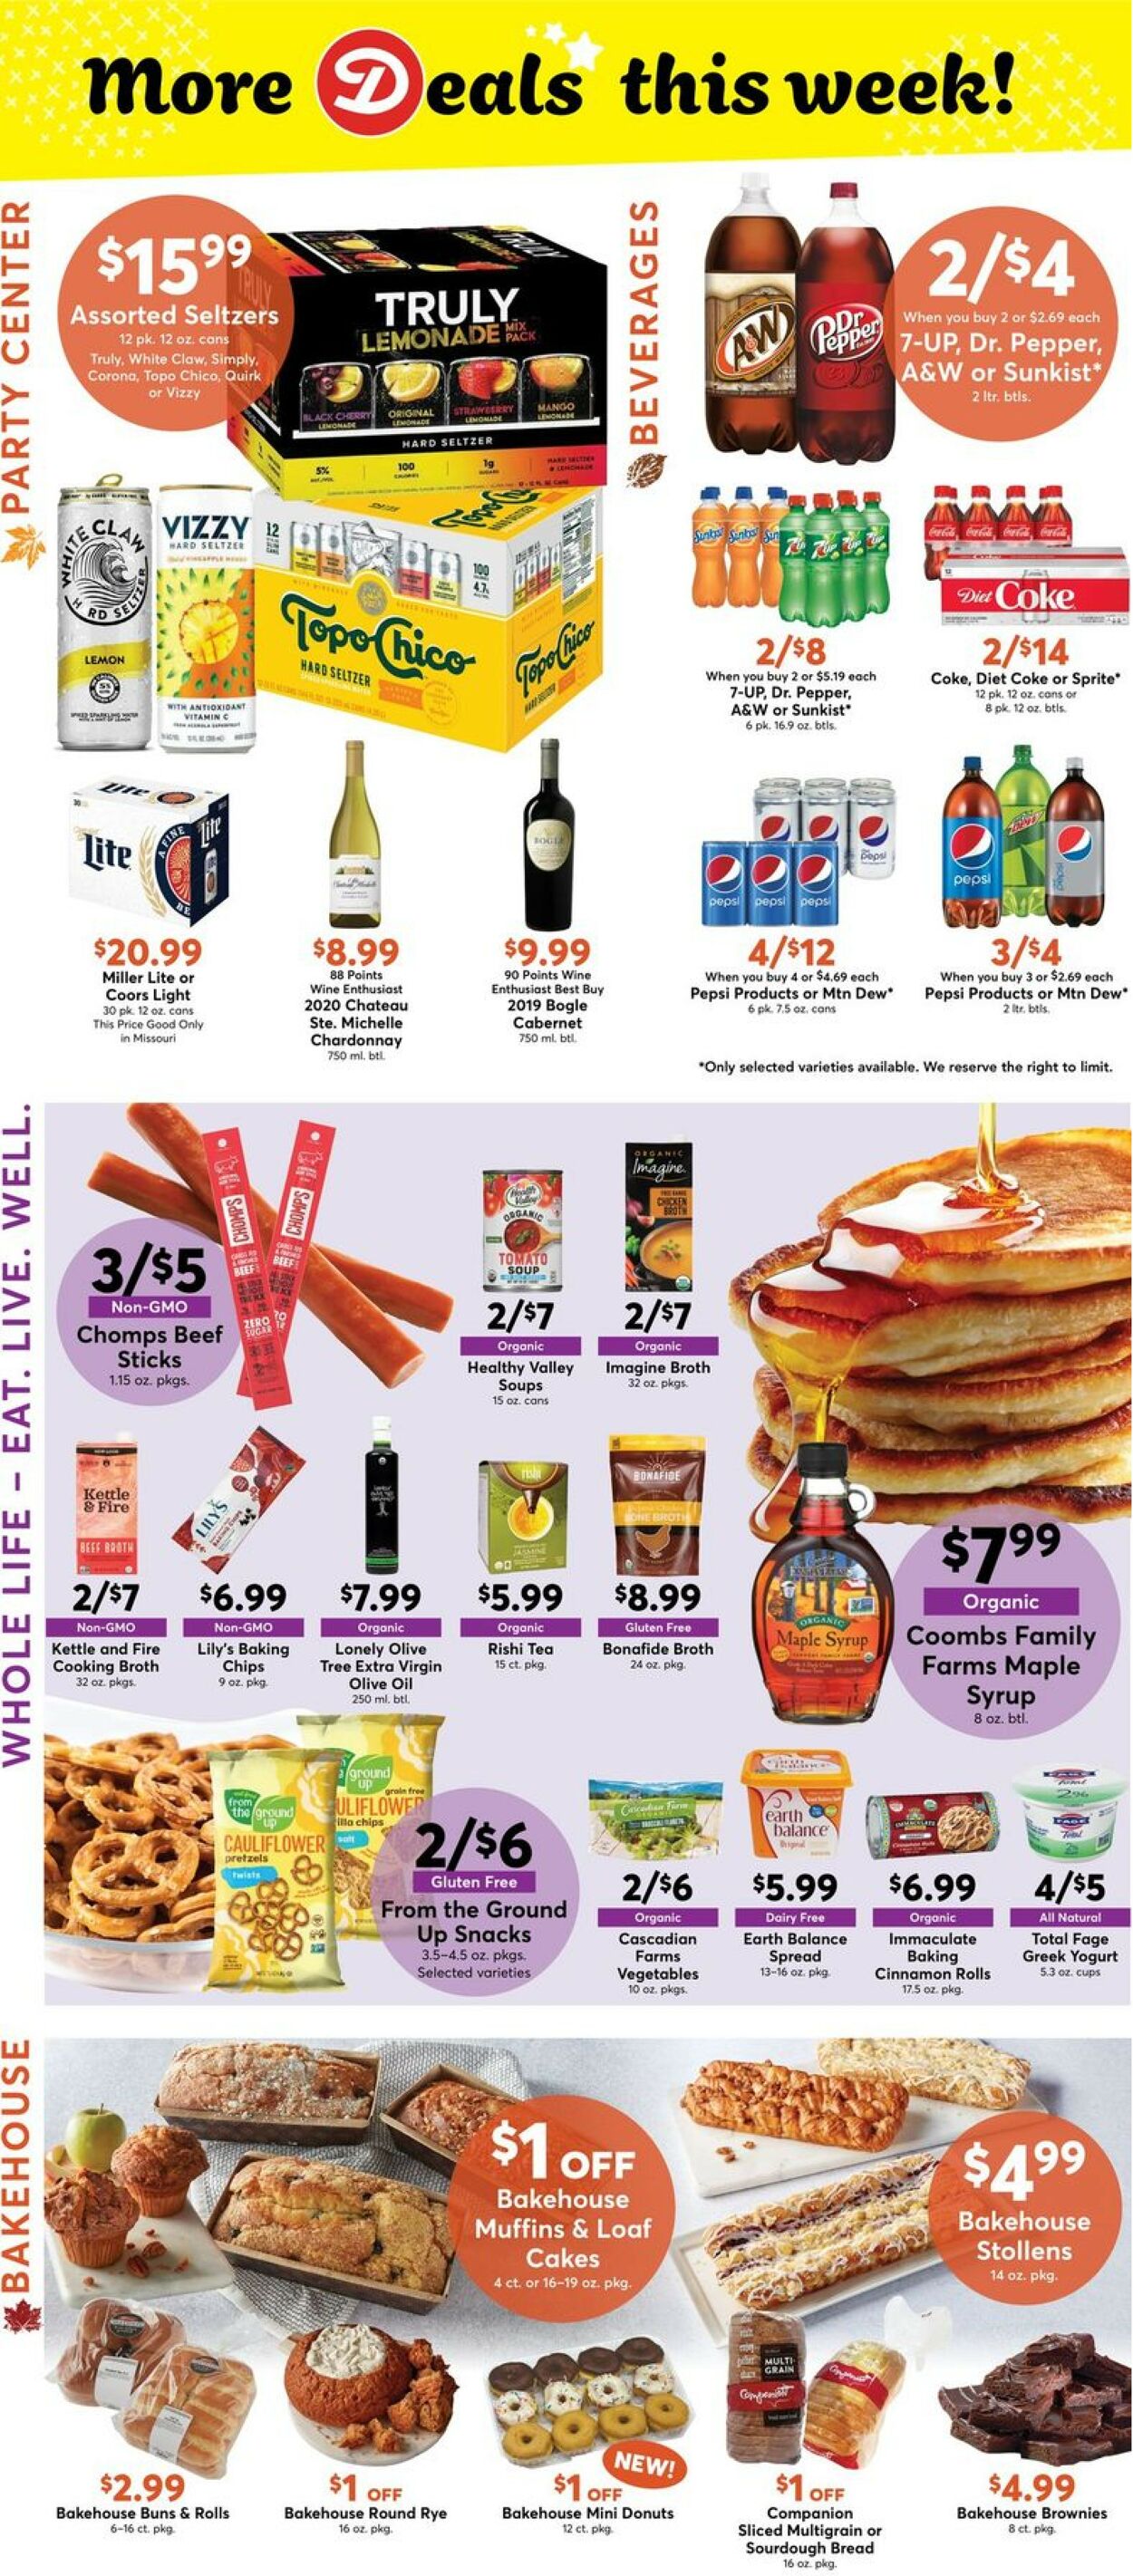 Catalogue Dierbergs from 11/08/2022